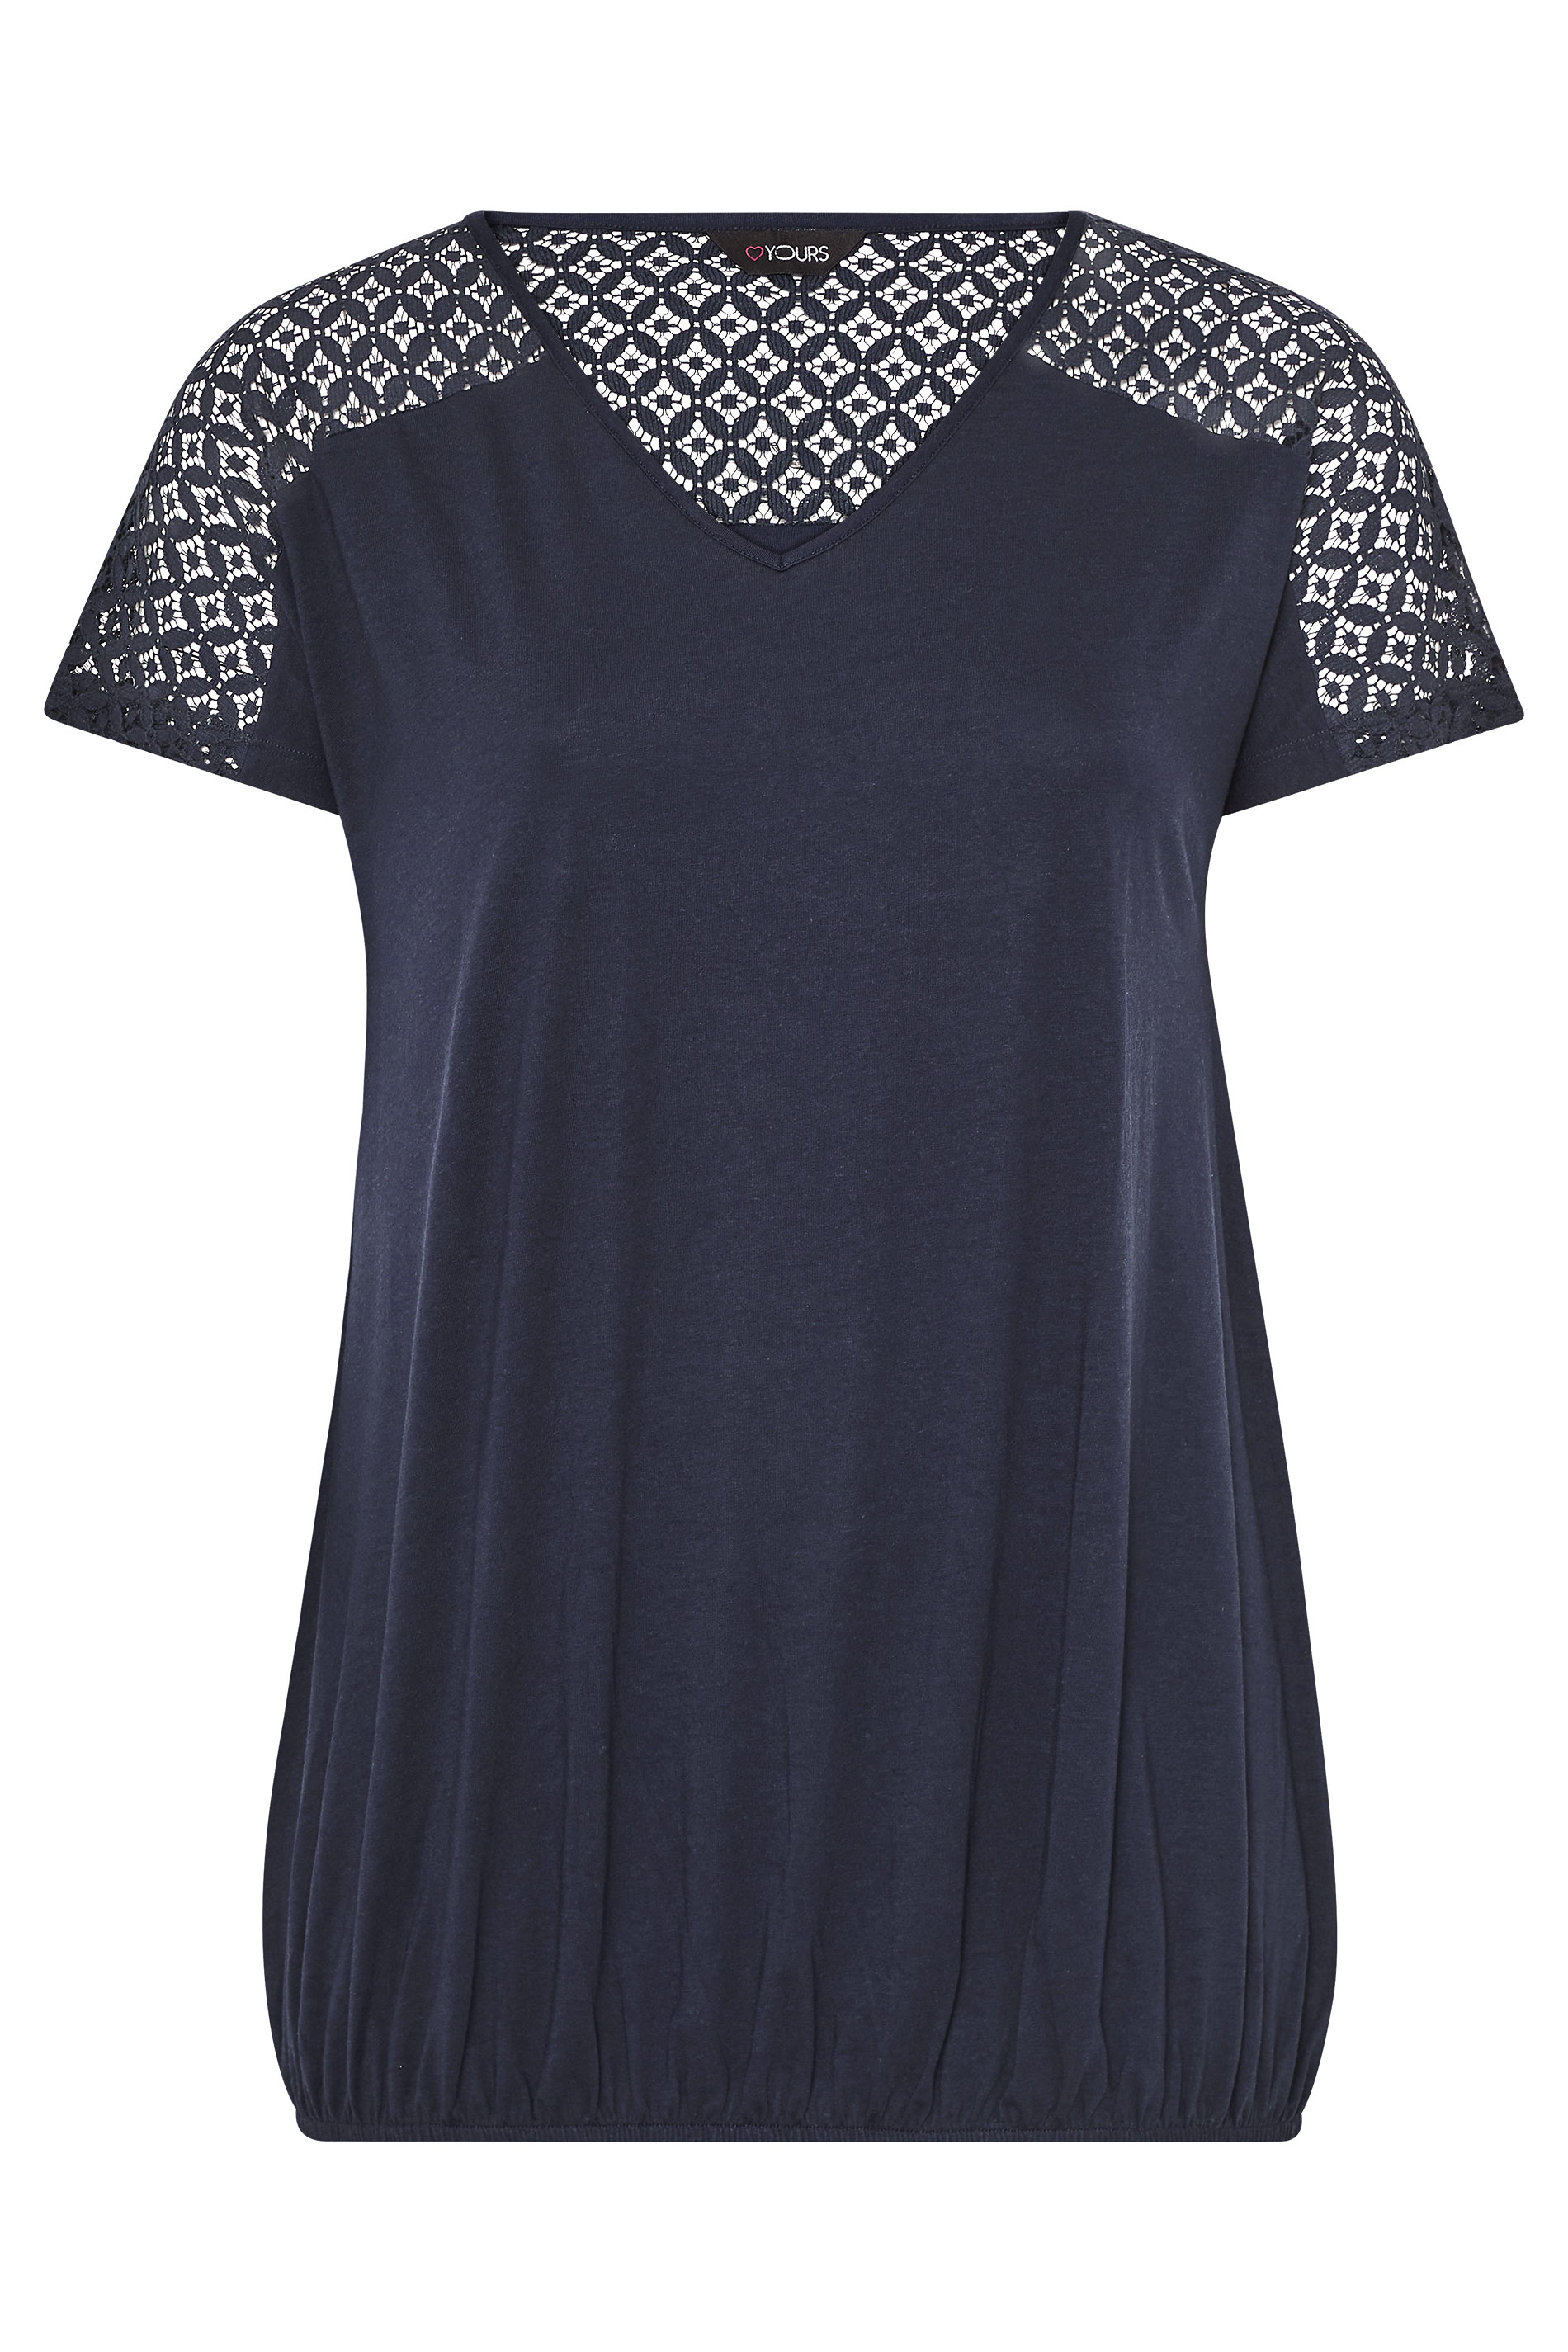 Navy Lace Sleeve Bubble Hem Top | Yours Clothing